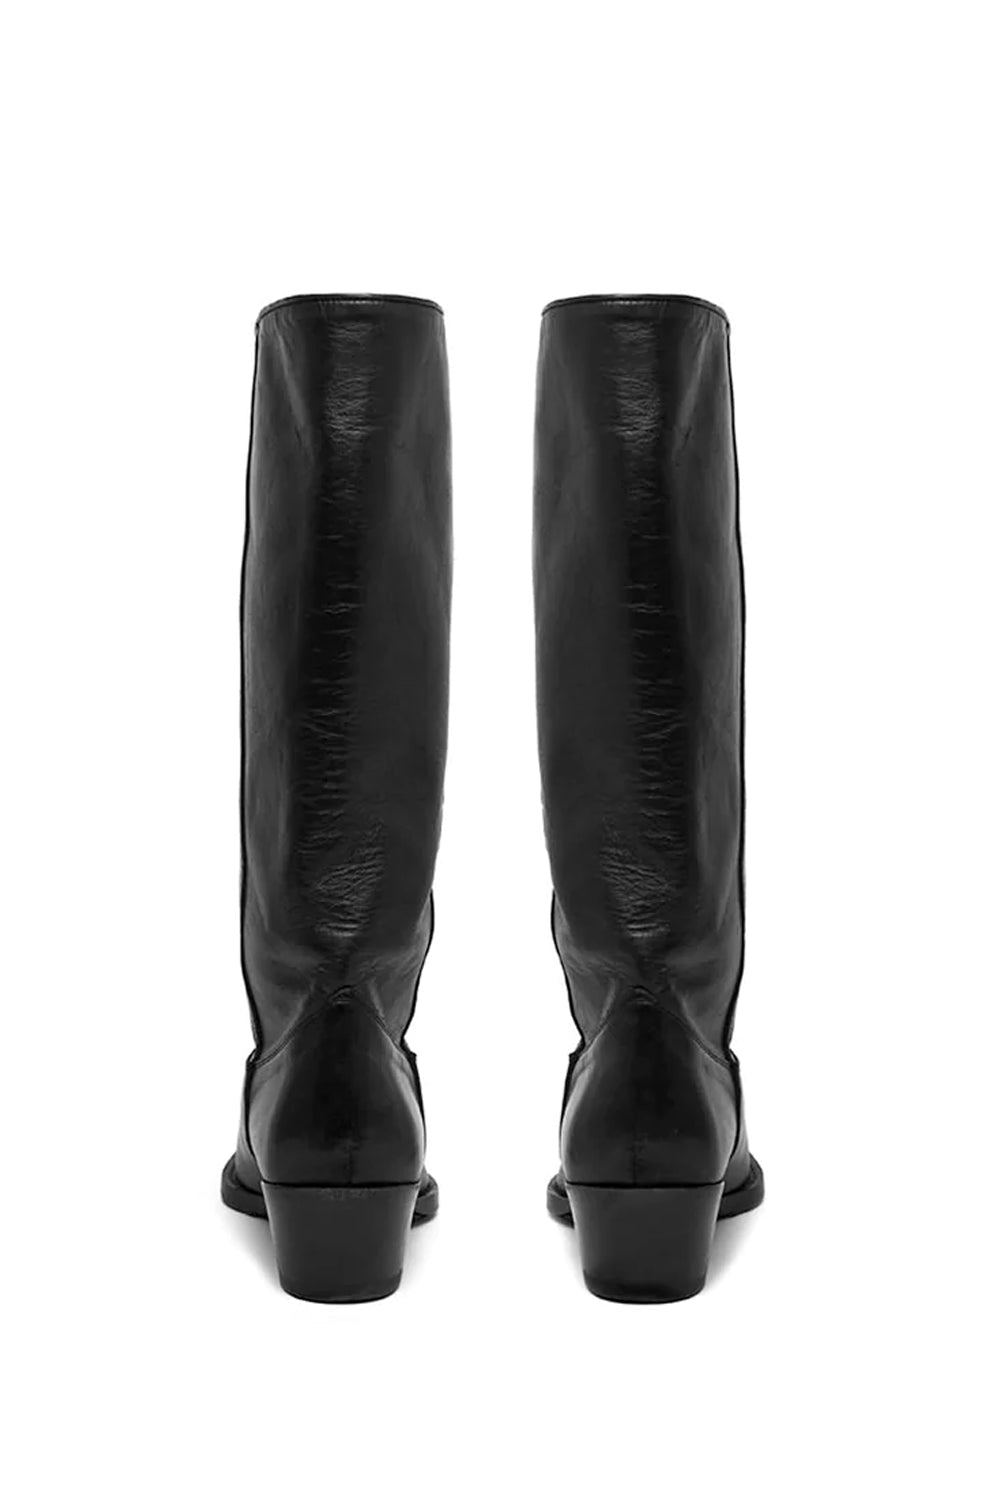 TEXANO BOOT Black leather Texan boots. Squared metal tip. Heel height: 5 cm. Made in Italy. HTC LOS ANGELES